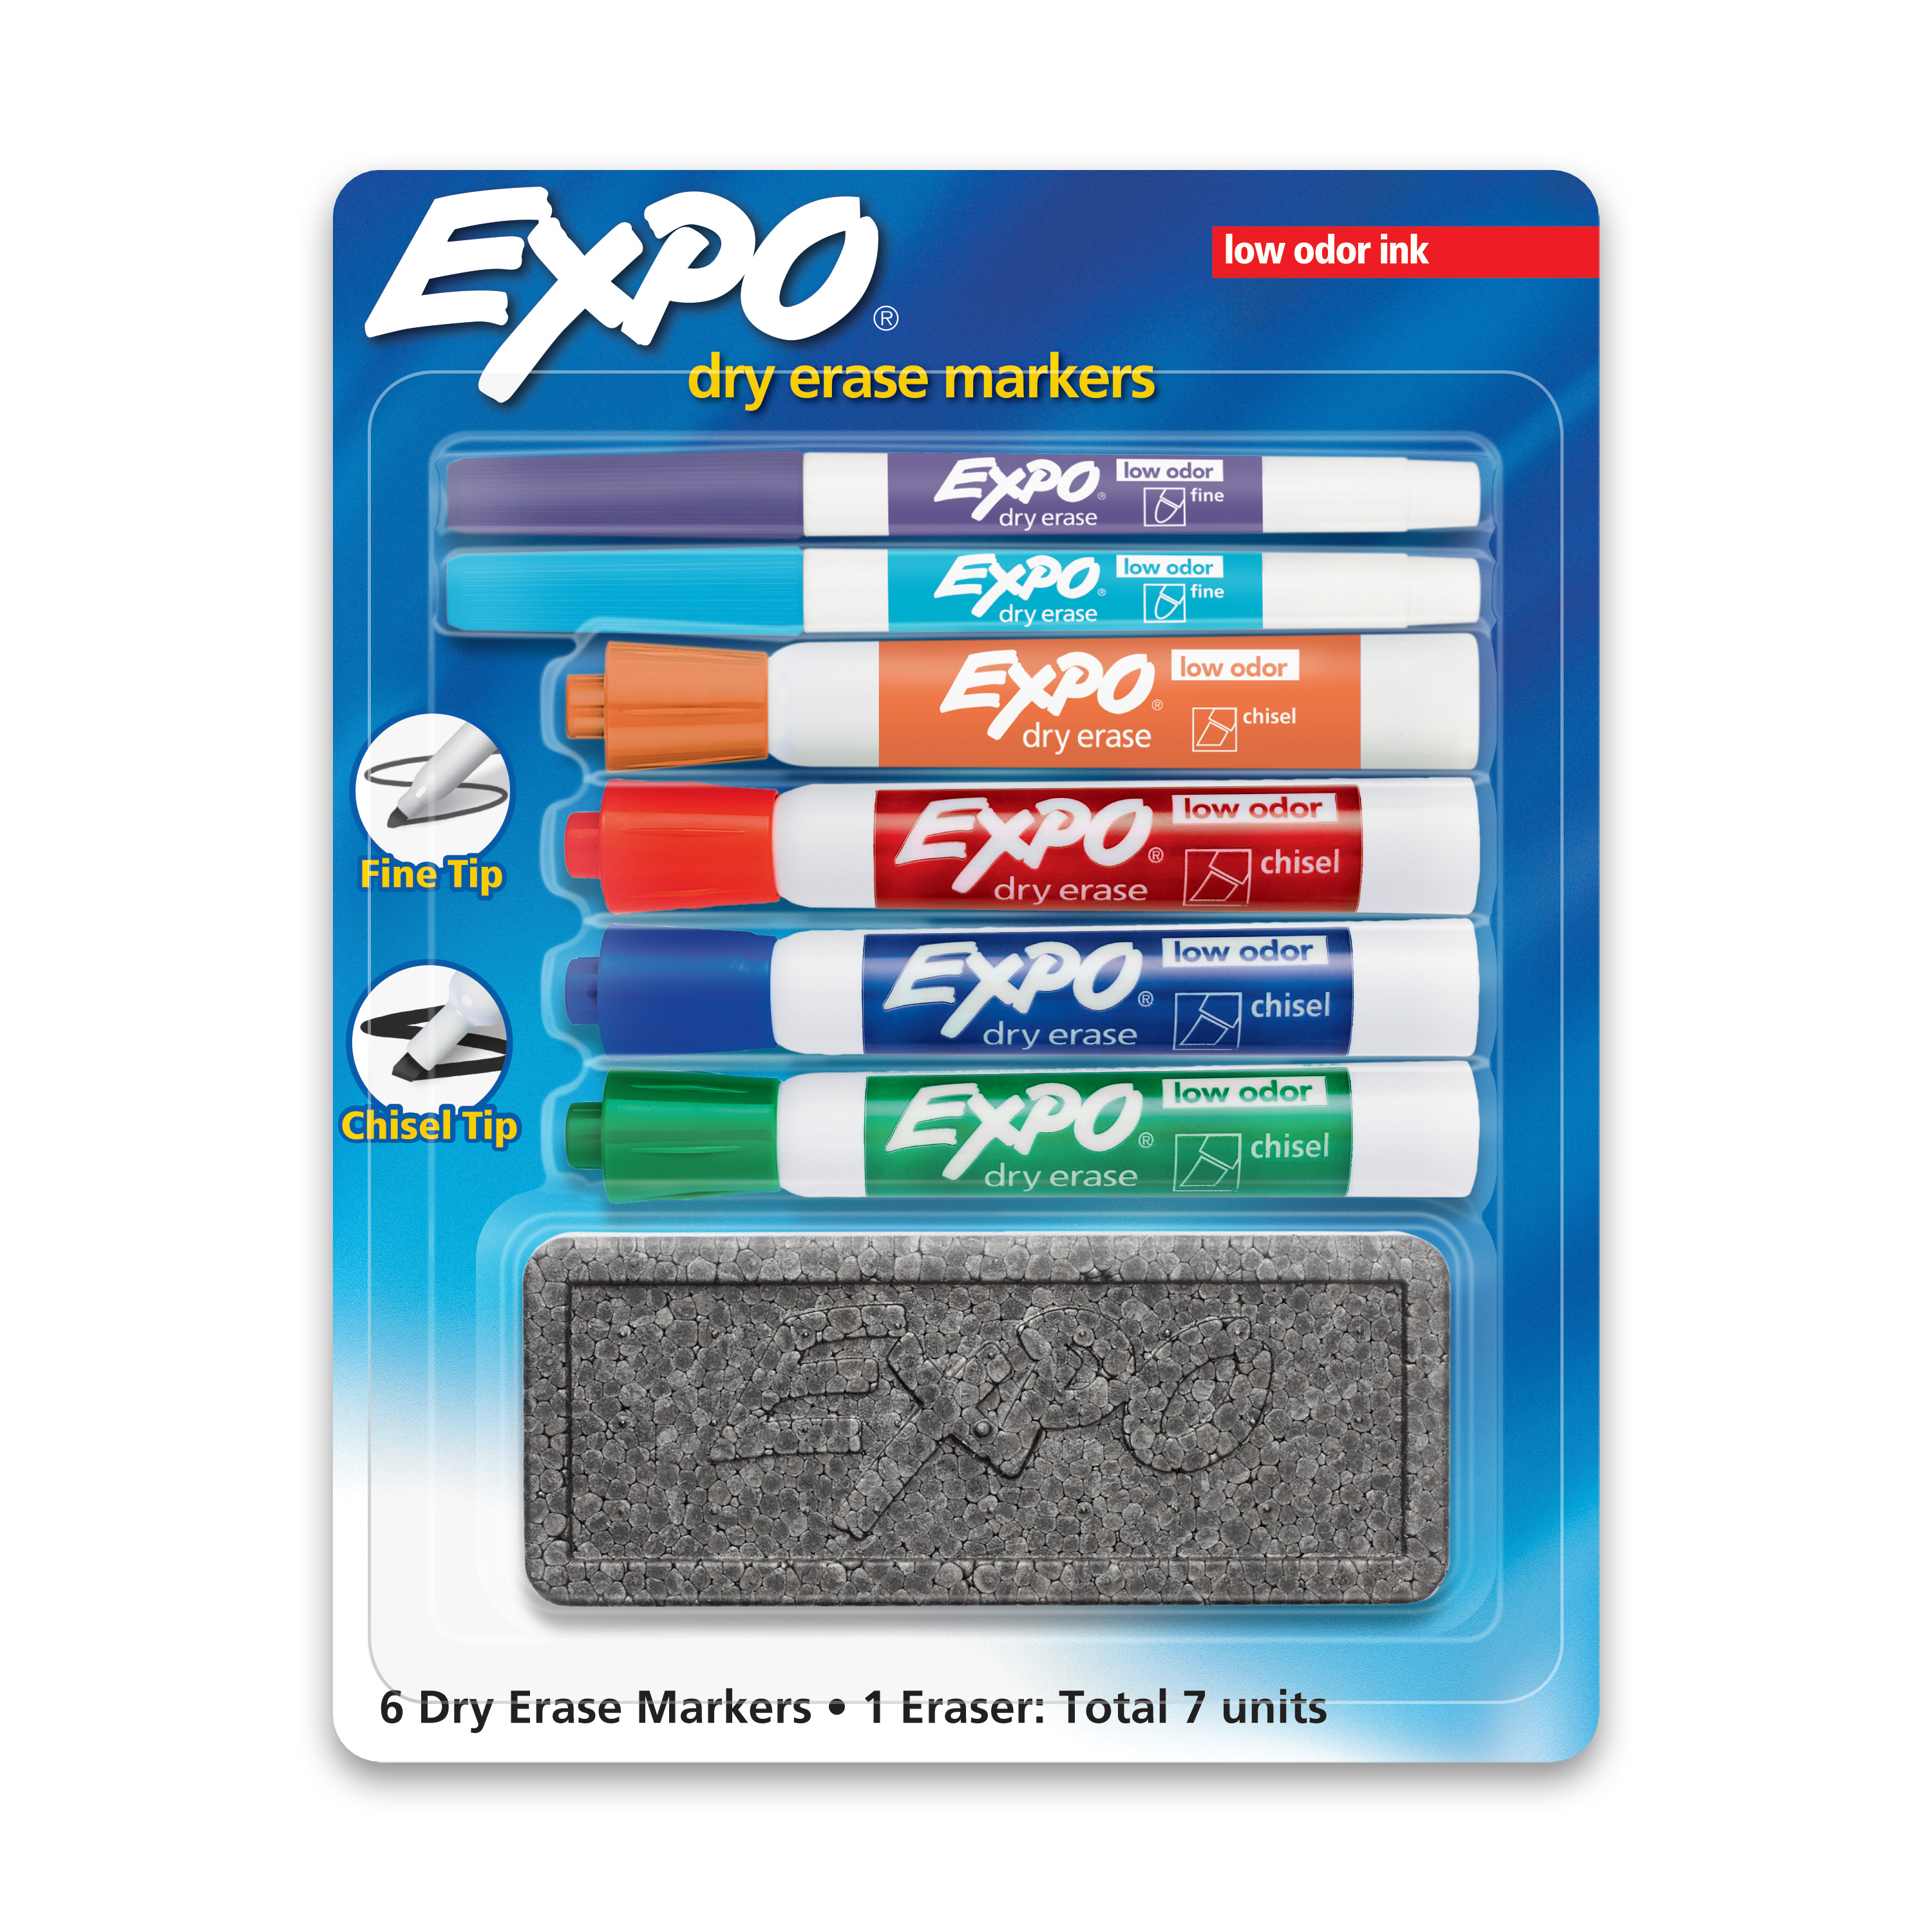 Expo Low Odor Dry Erase Markers, Chisel and Fine Tip, Assorted Colors, Eraser, 7 Piece Set - image 1 of 8